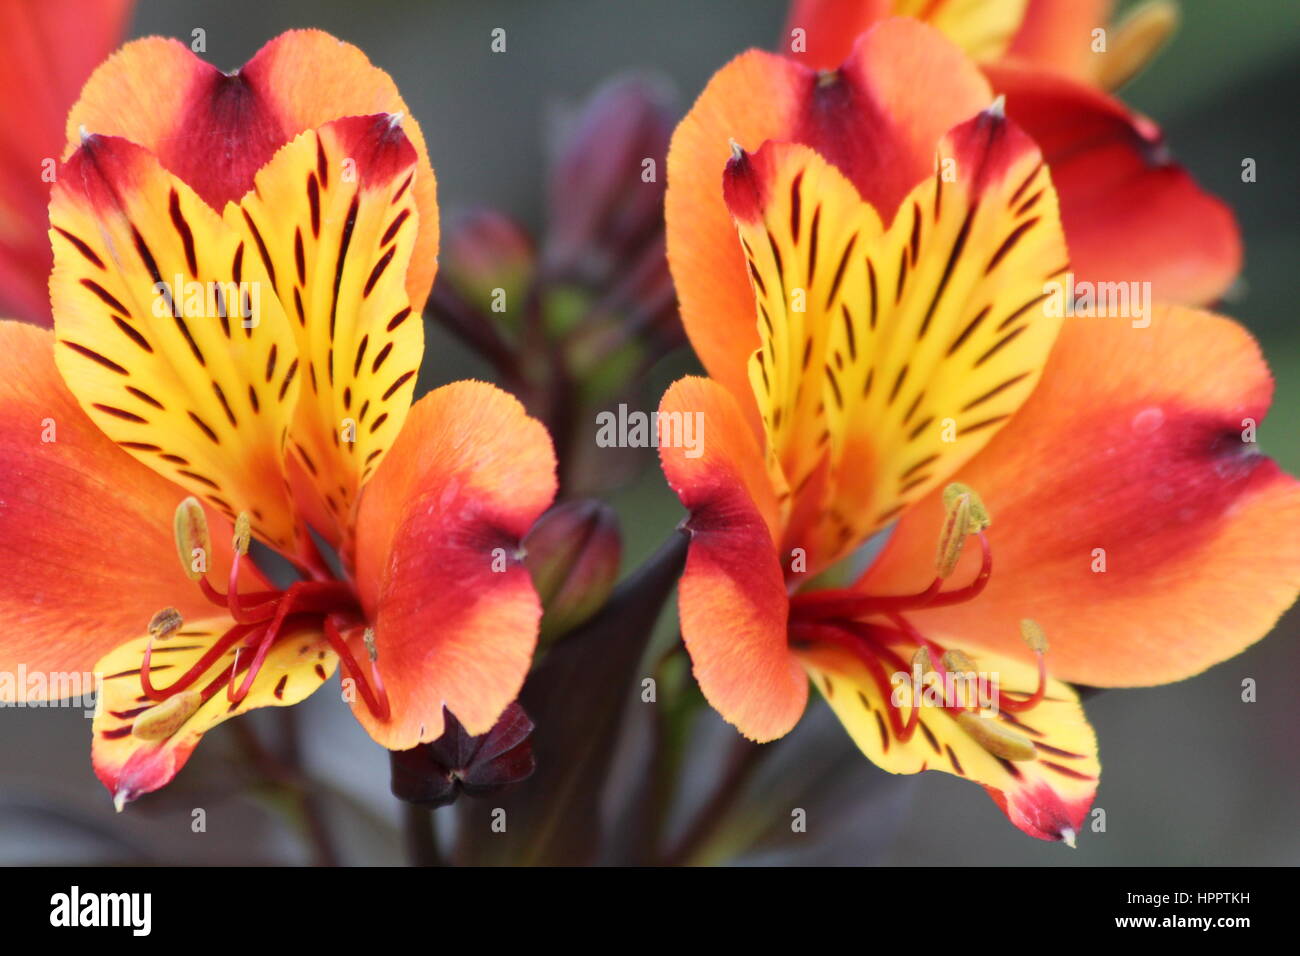 Vibrant orange orchids and lily flowers Stock Photo